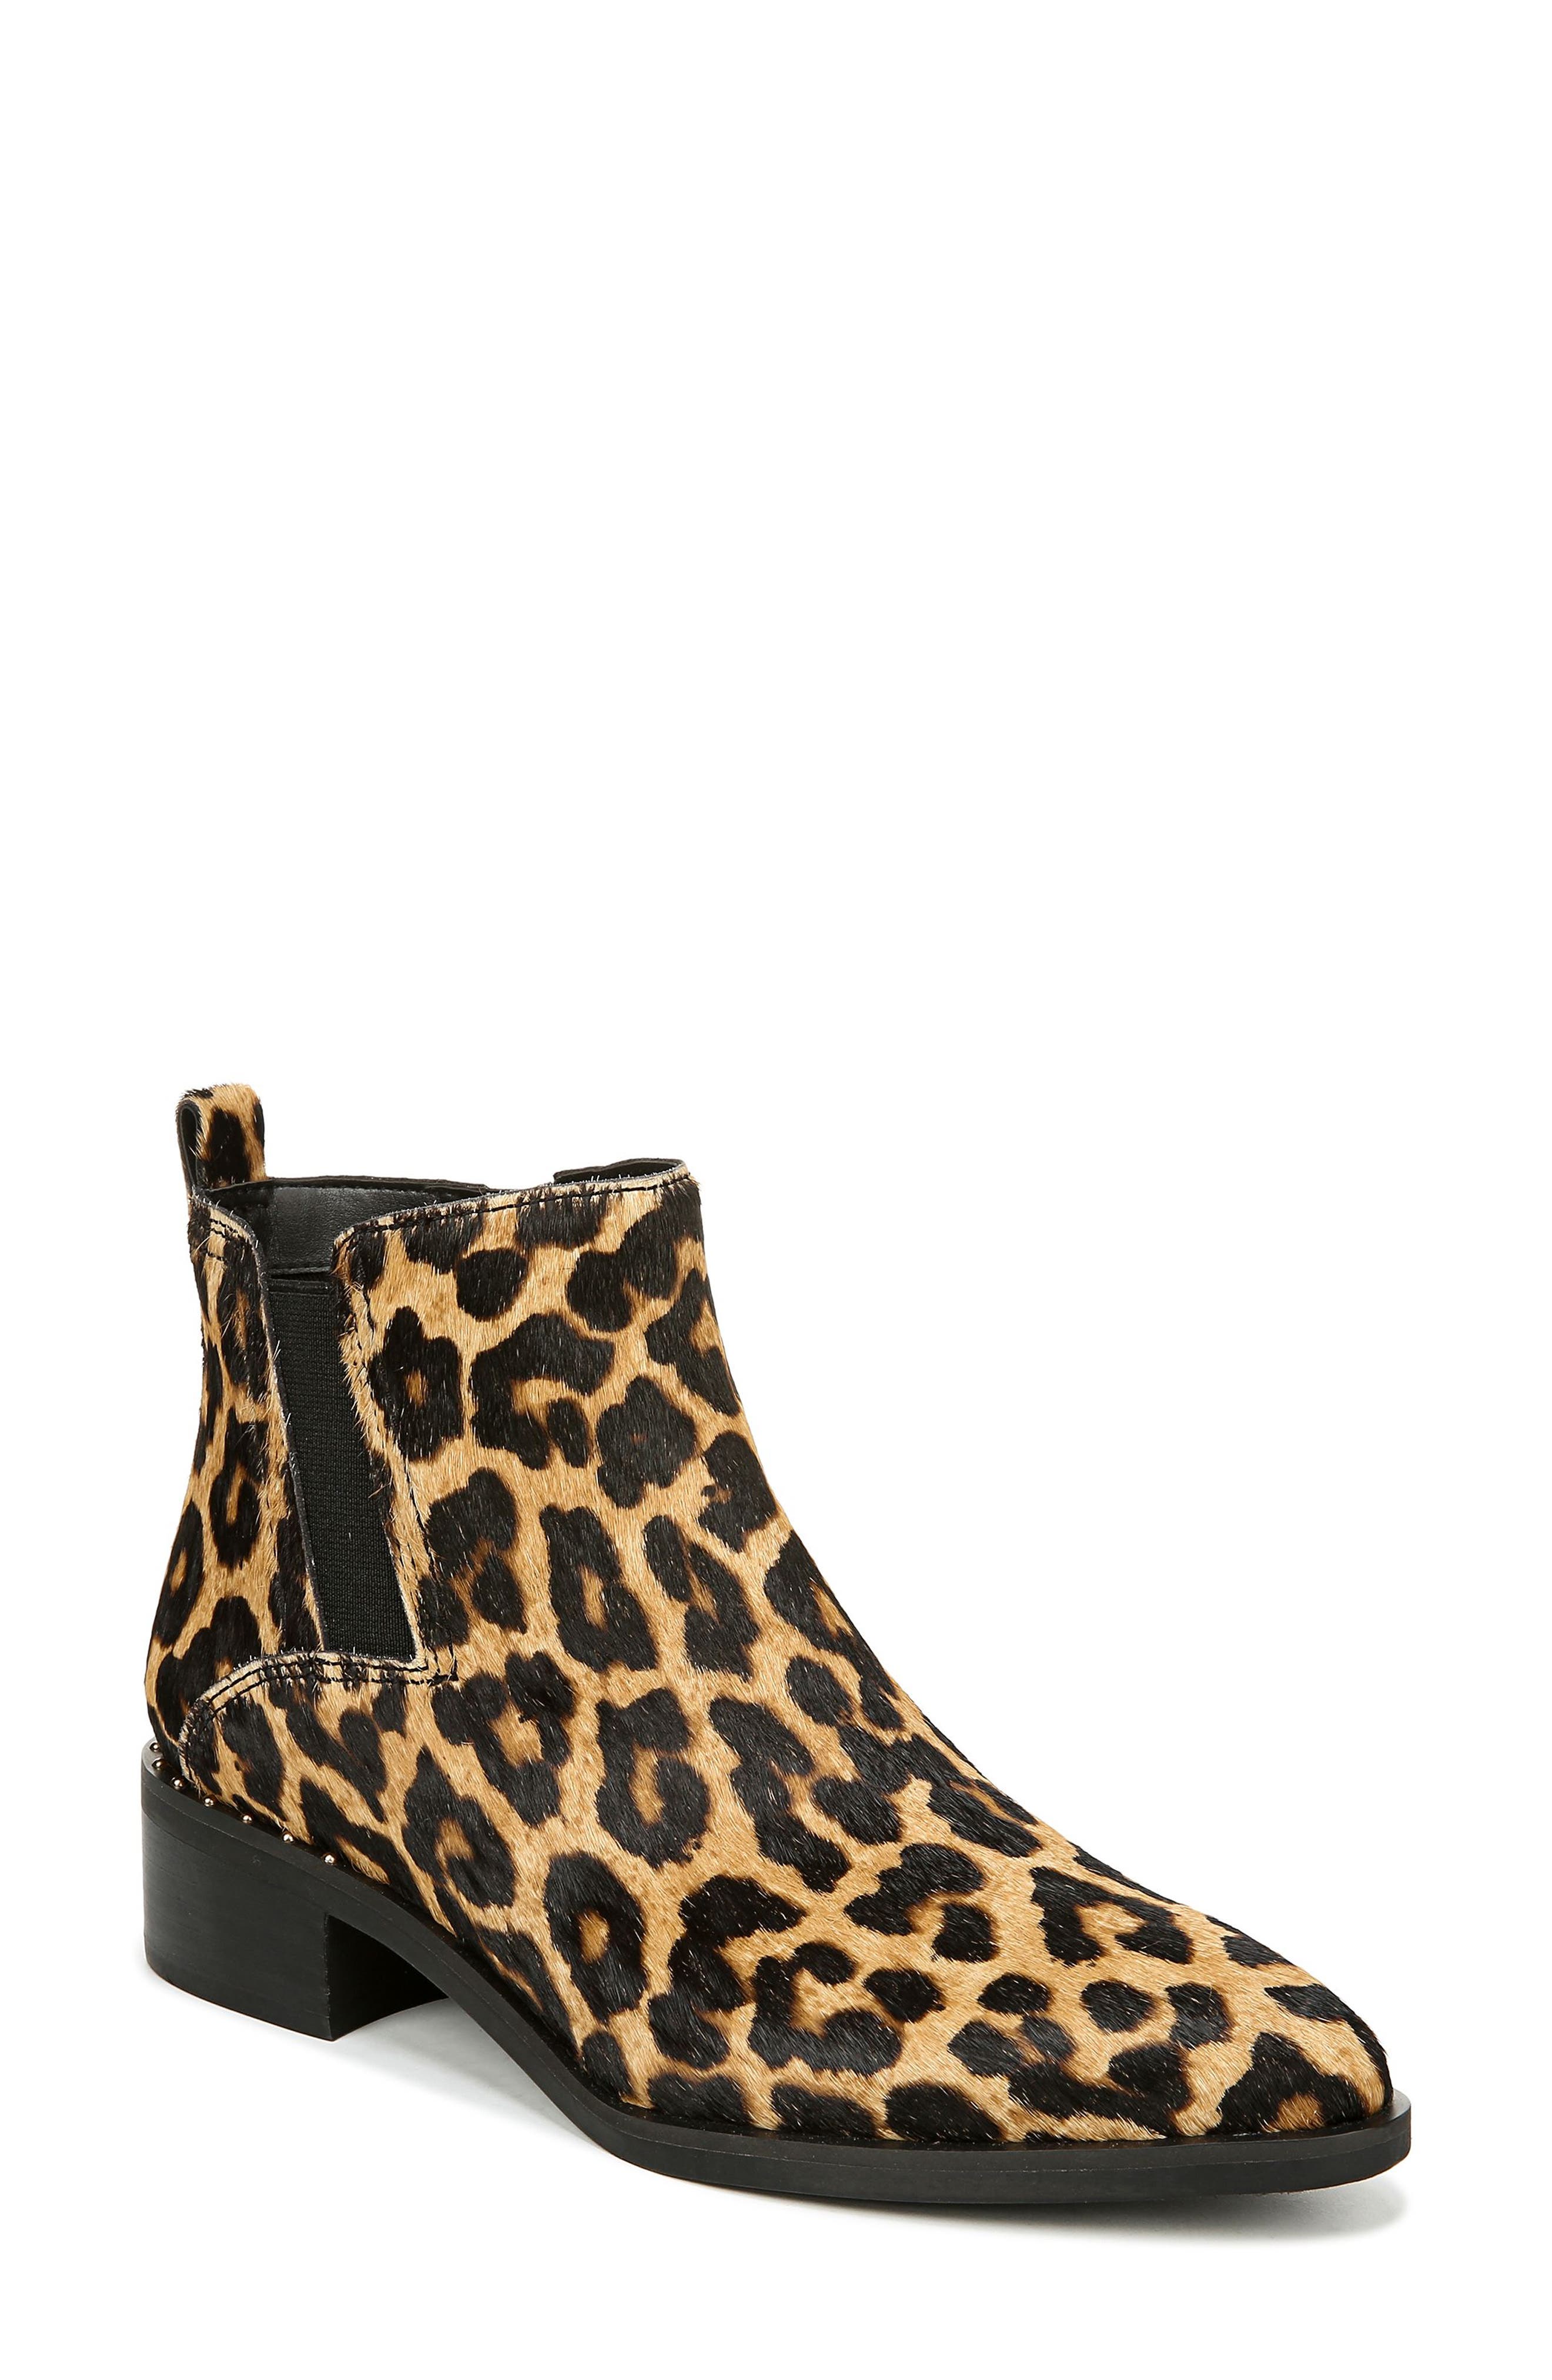 Heather Whiskey Leopard Calf Hair Franco Sarto Ankle Boots 